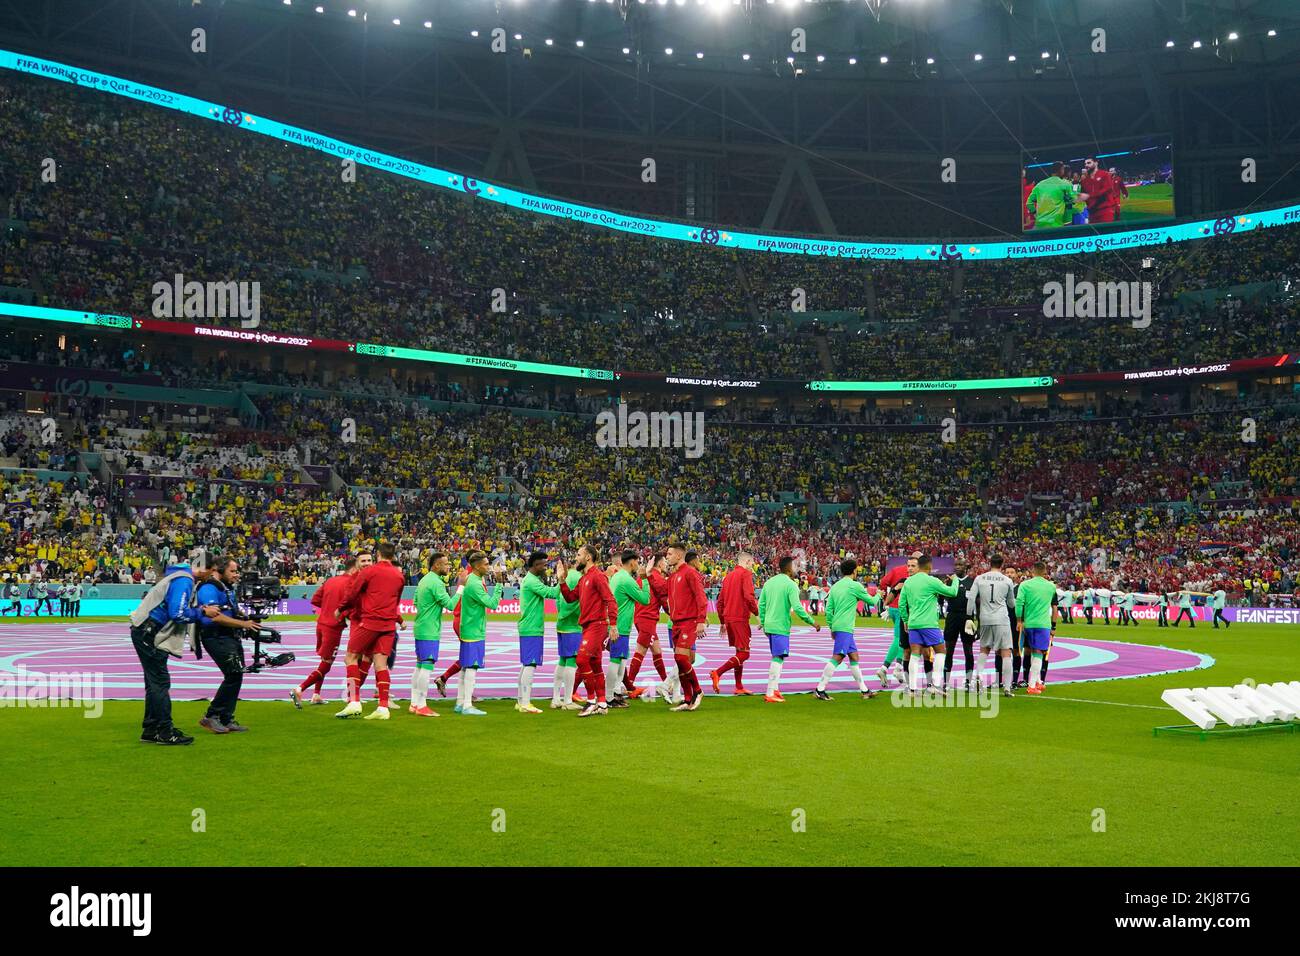 Brazil players and Serbia players during the FIFA World Cup Qatar 2022 match, Group G, between Brazil and Serbia played at Lusail Stadium on Nov 24, 2022 in Lusail, Qatar. (Photo by Bagu Blanco / PRESSIN) Credit: PRESSINPHOTO SPORTS AGENCY/Alamy Live News Stock Photo